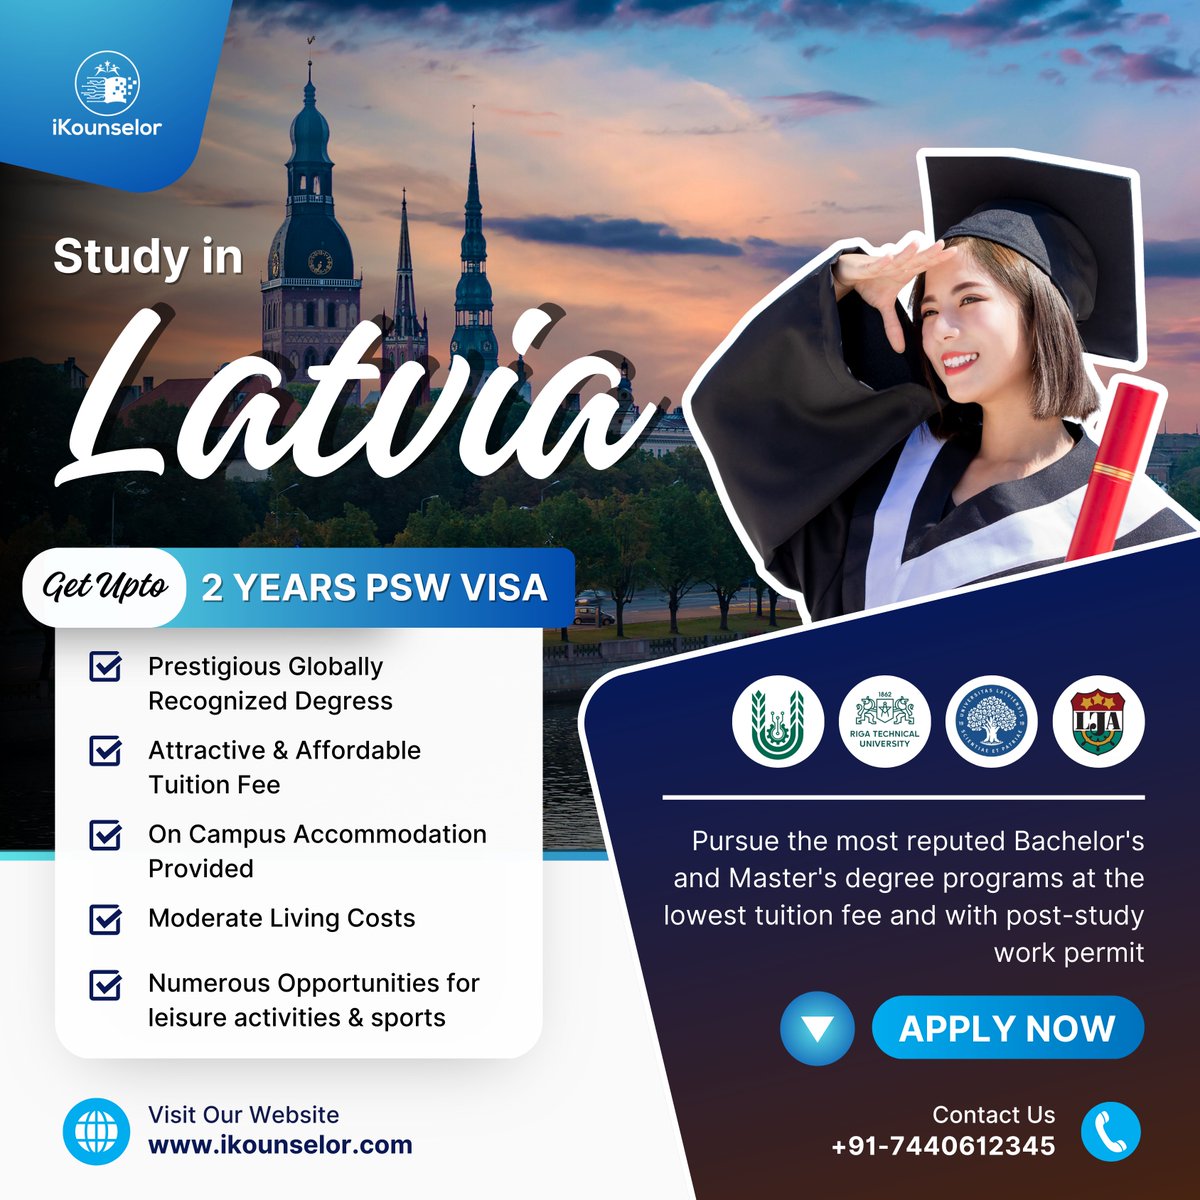 Discover the hidden gem of education! Study in Latvia and unlock a world of opportunities.

Apply today and start your journey toward academic excellence and personal growth.

Contact us at 7440612345 or visit ikounselor.com for guidance and support.

#StudyInLatvia